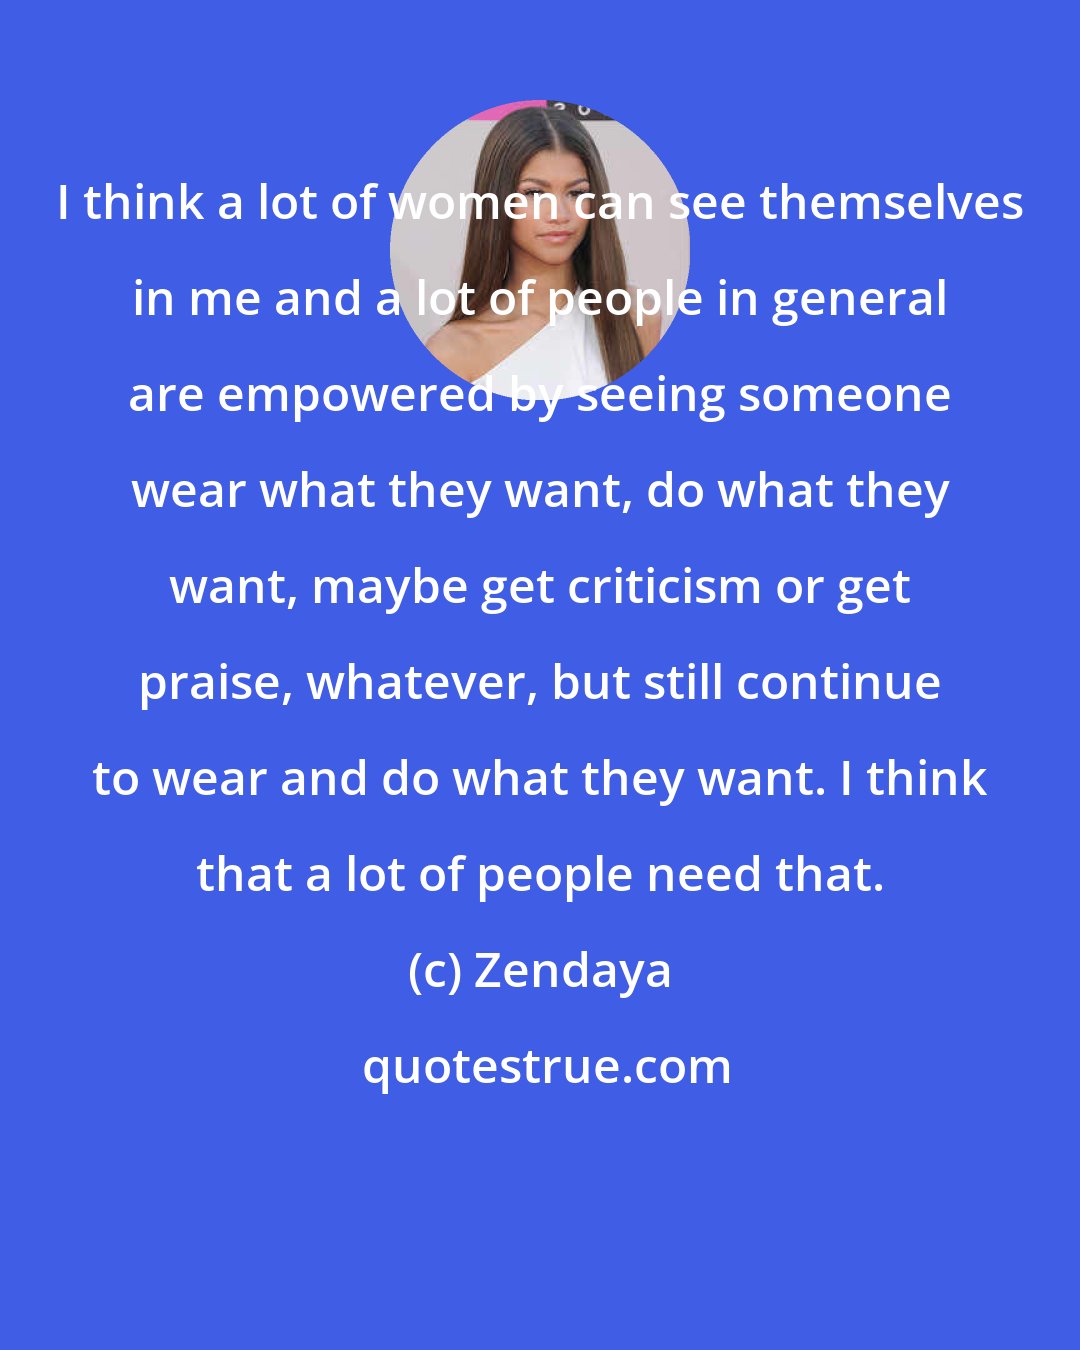 Zendaya: I think a lot of women can see themselves in me and a lot of people in general are empowered by seeing someone wear what they want, do what they want, maybe get criticism or get praise, whatever, but still continue to wear and do what they want. I think that a lot of people need that.